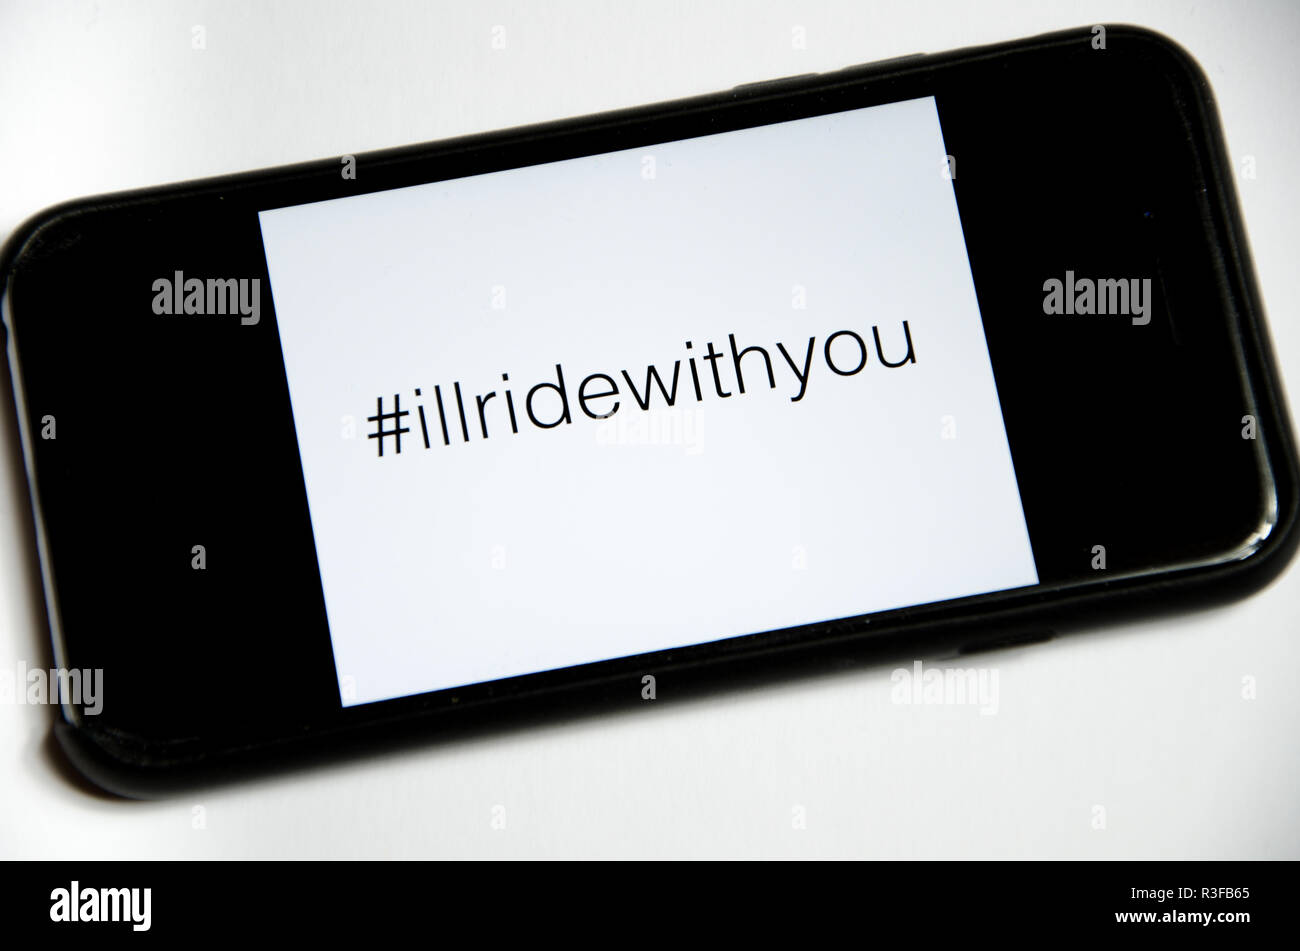 smartphone with hashtag illridewithyou Stock Photo